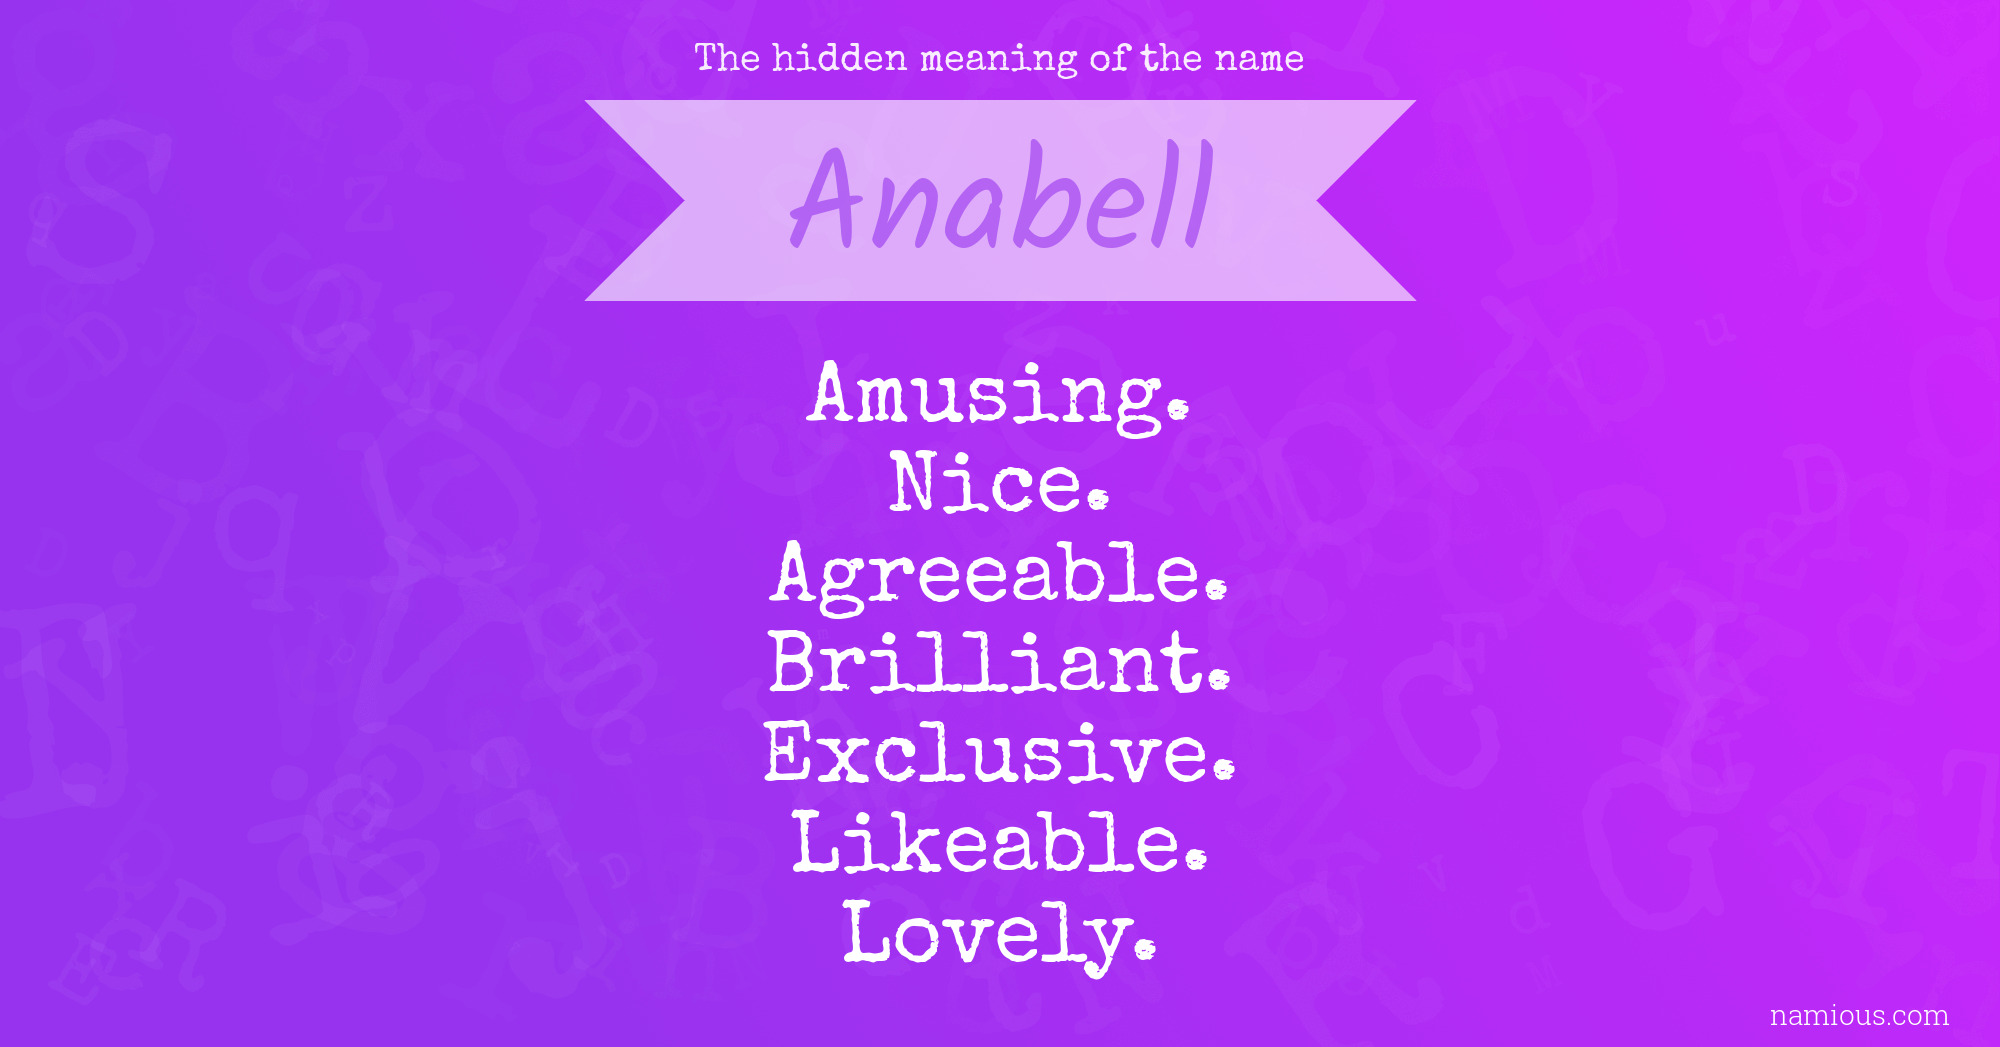 The hidden meaning of the name Anabell